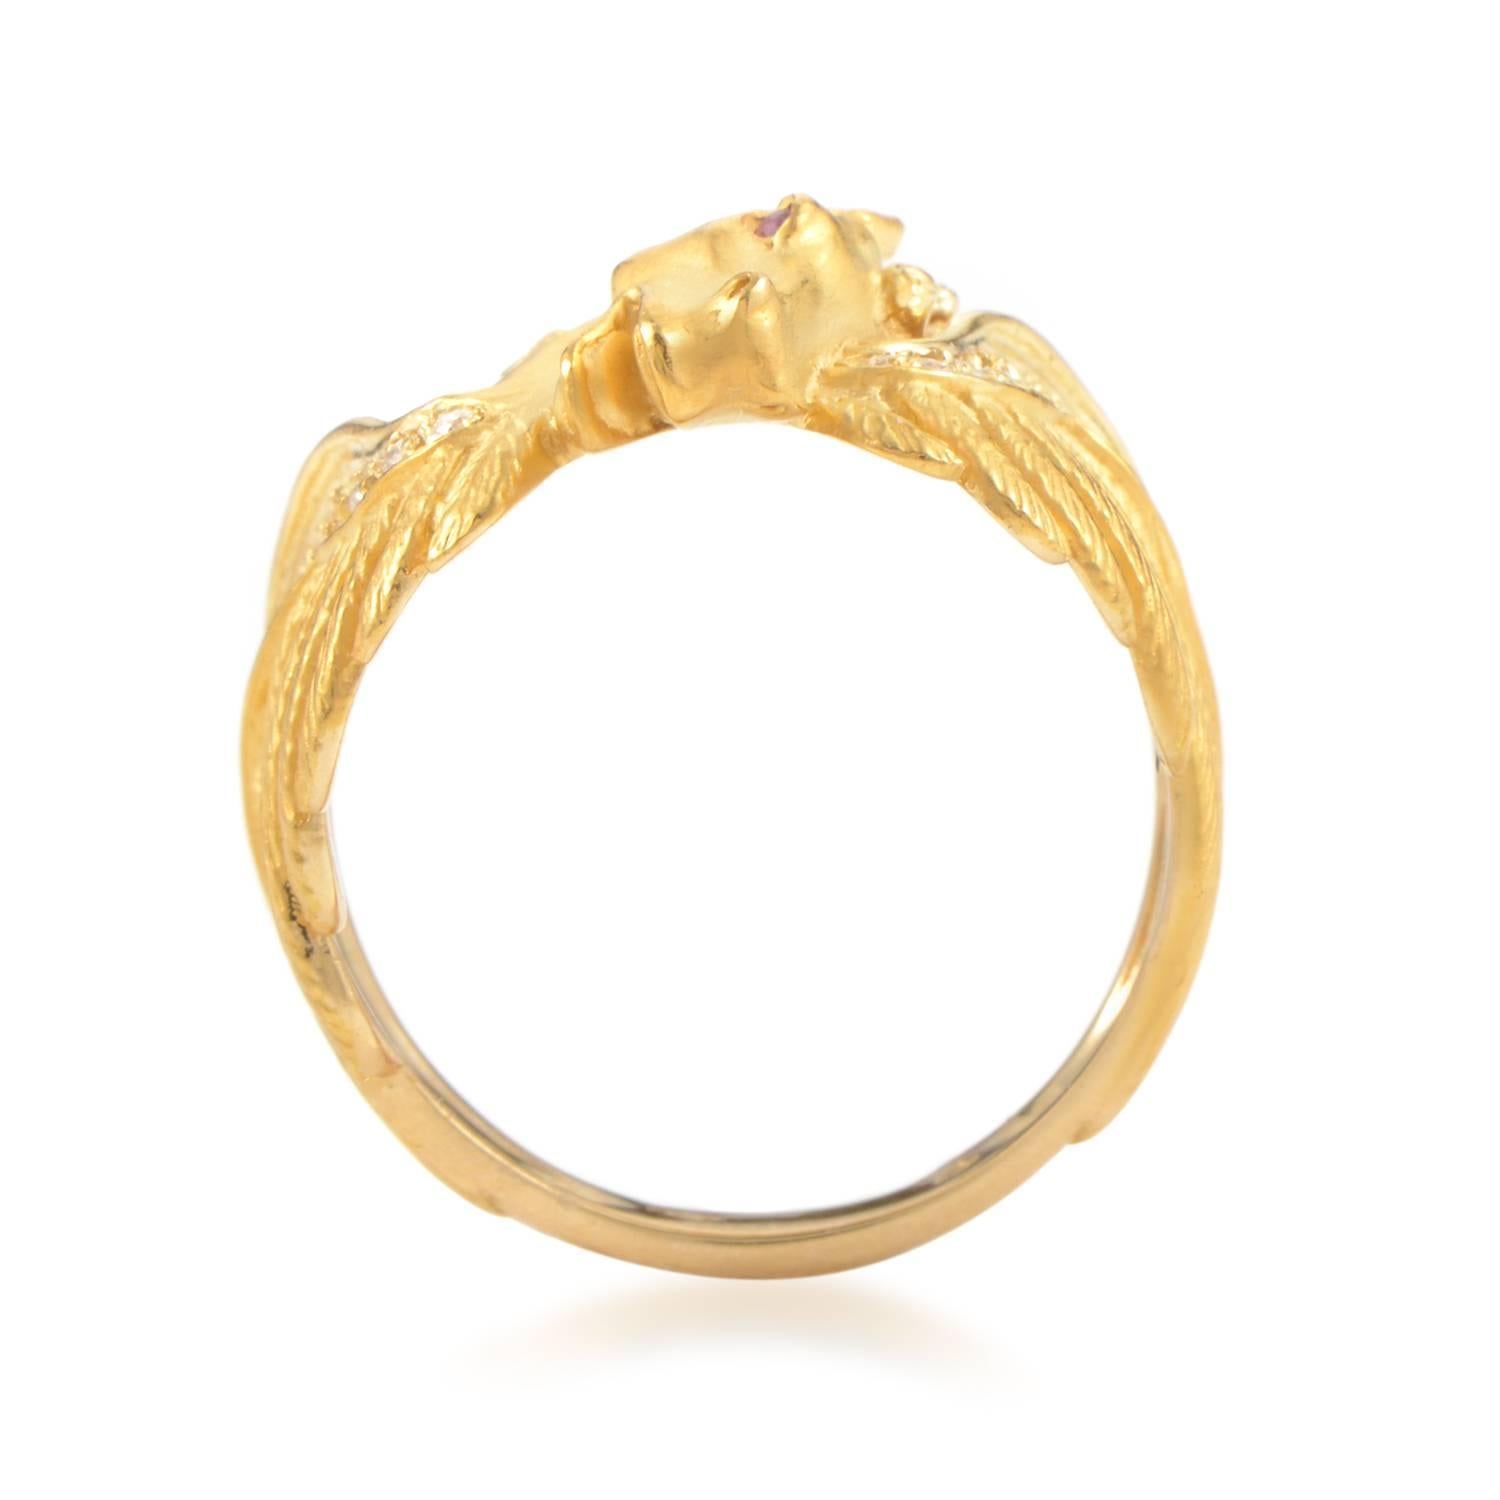 Once again using the majestic and wild beauty of animals as an inspiration for an exceptional design, Carrera y Carrera present this fantastic 18K yellow gold ring with a motif of horse's head upon a wing-like shape, embellished with 0.25ct of